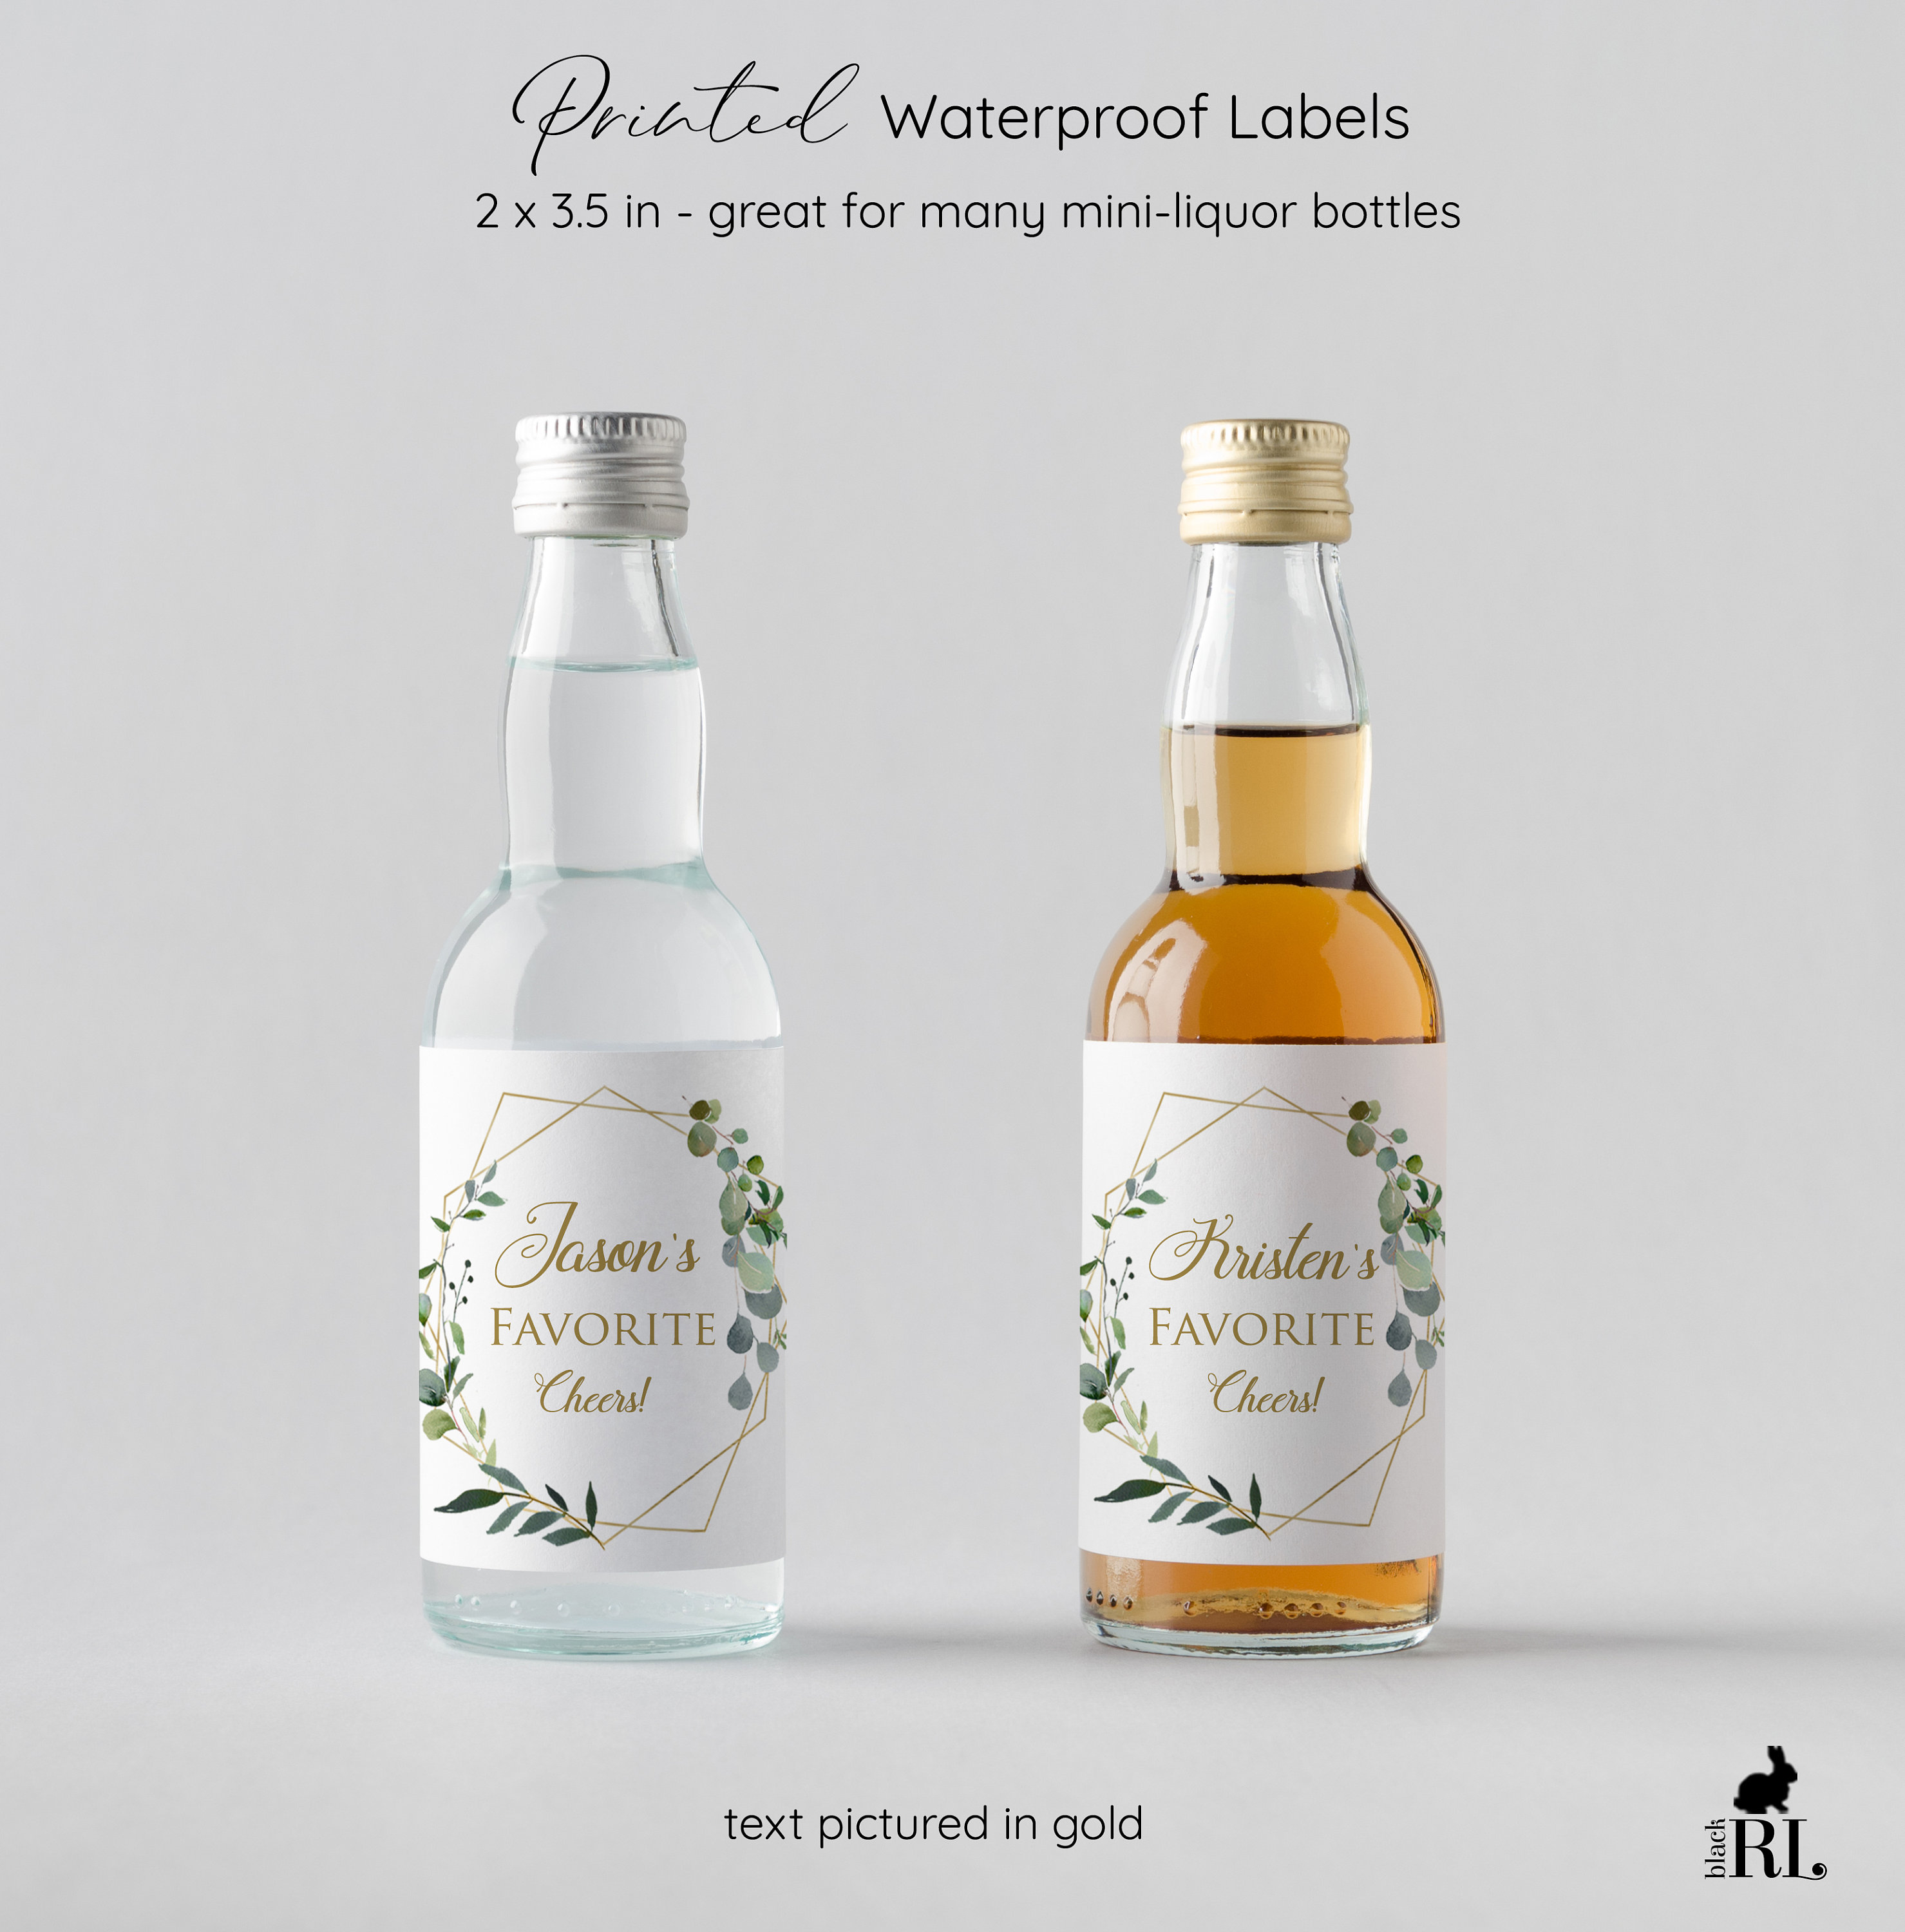 Greenery Wreath Geo Shape GG18 Personalized Mini Liquor Bottle Labels Printed Waterproof Favor Stickers 2 x 3.75 inches